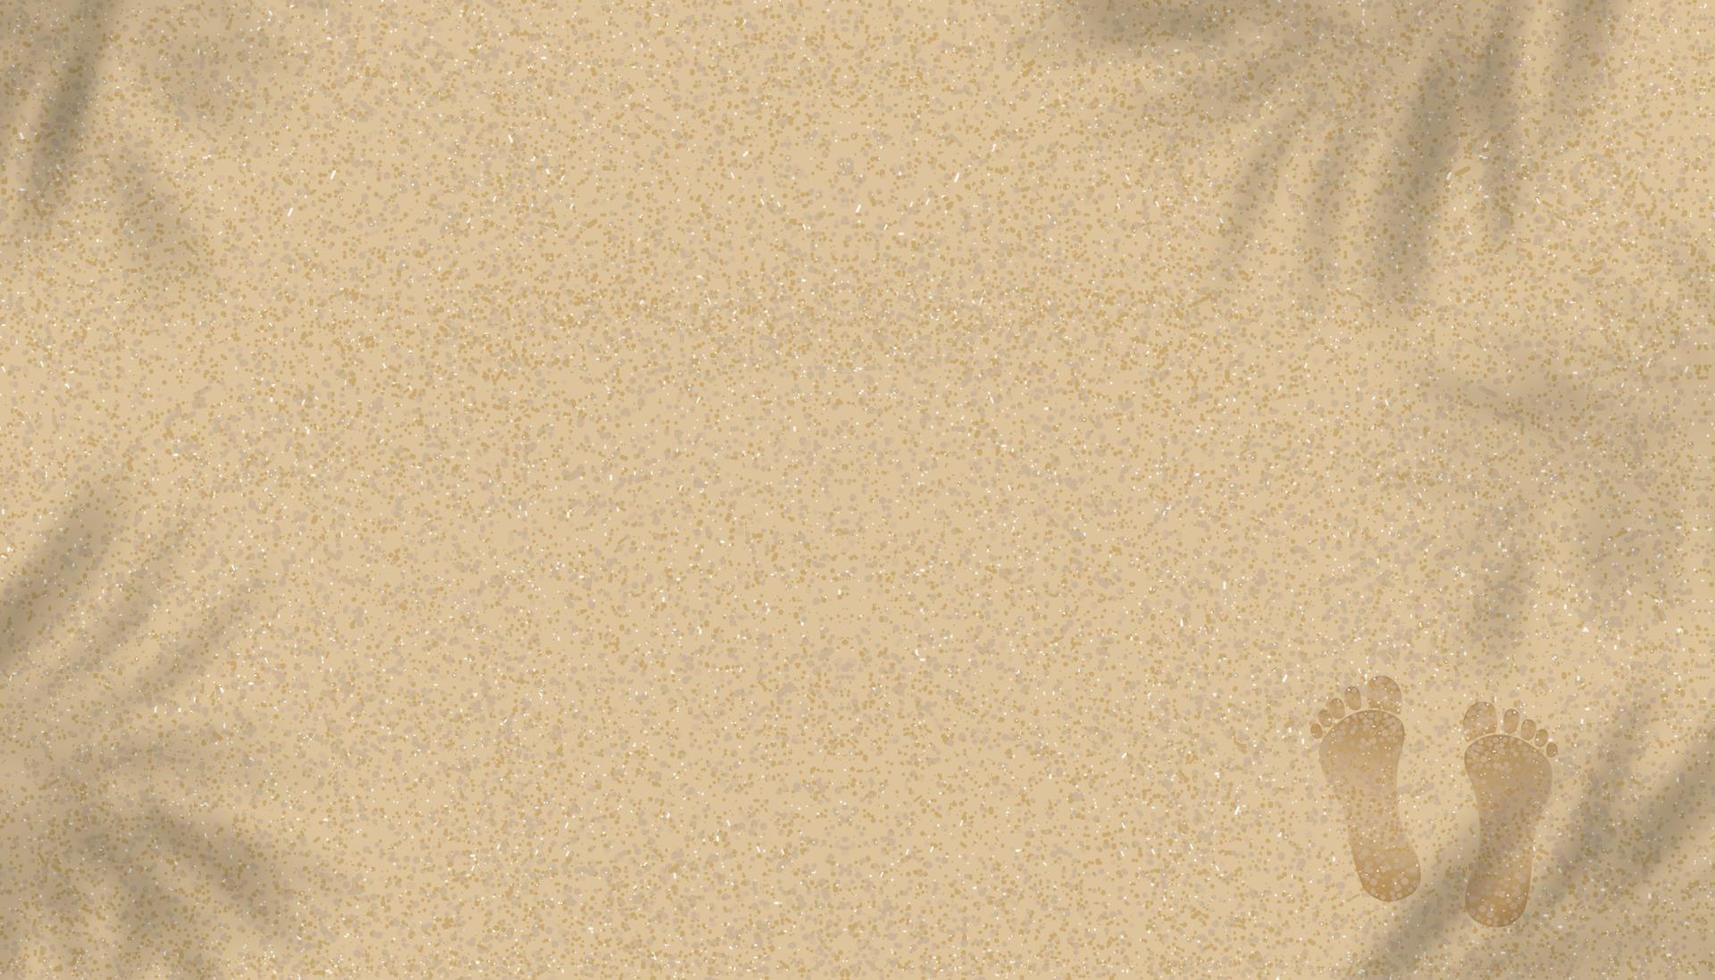 Sandy Beach Texture background with Palm leaf shadow and Footprints of human feet, Vector illustration Backdrop Brown Beach sand dune with barefoot for Summer banner background.